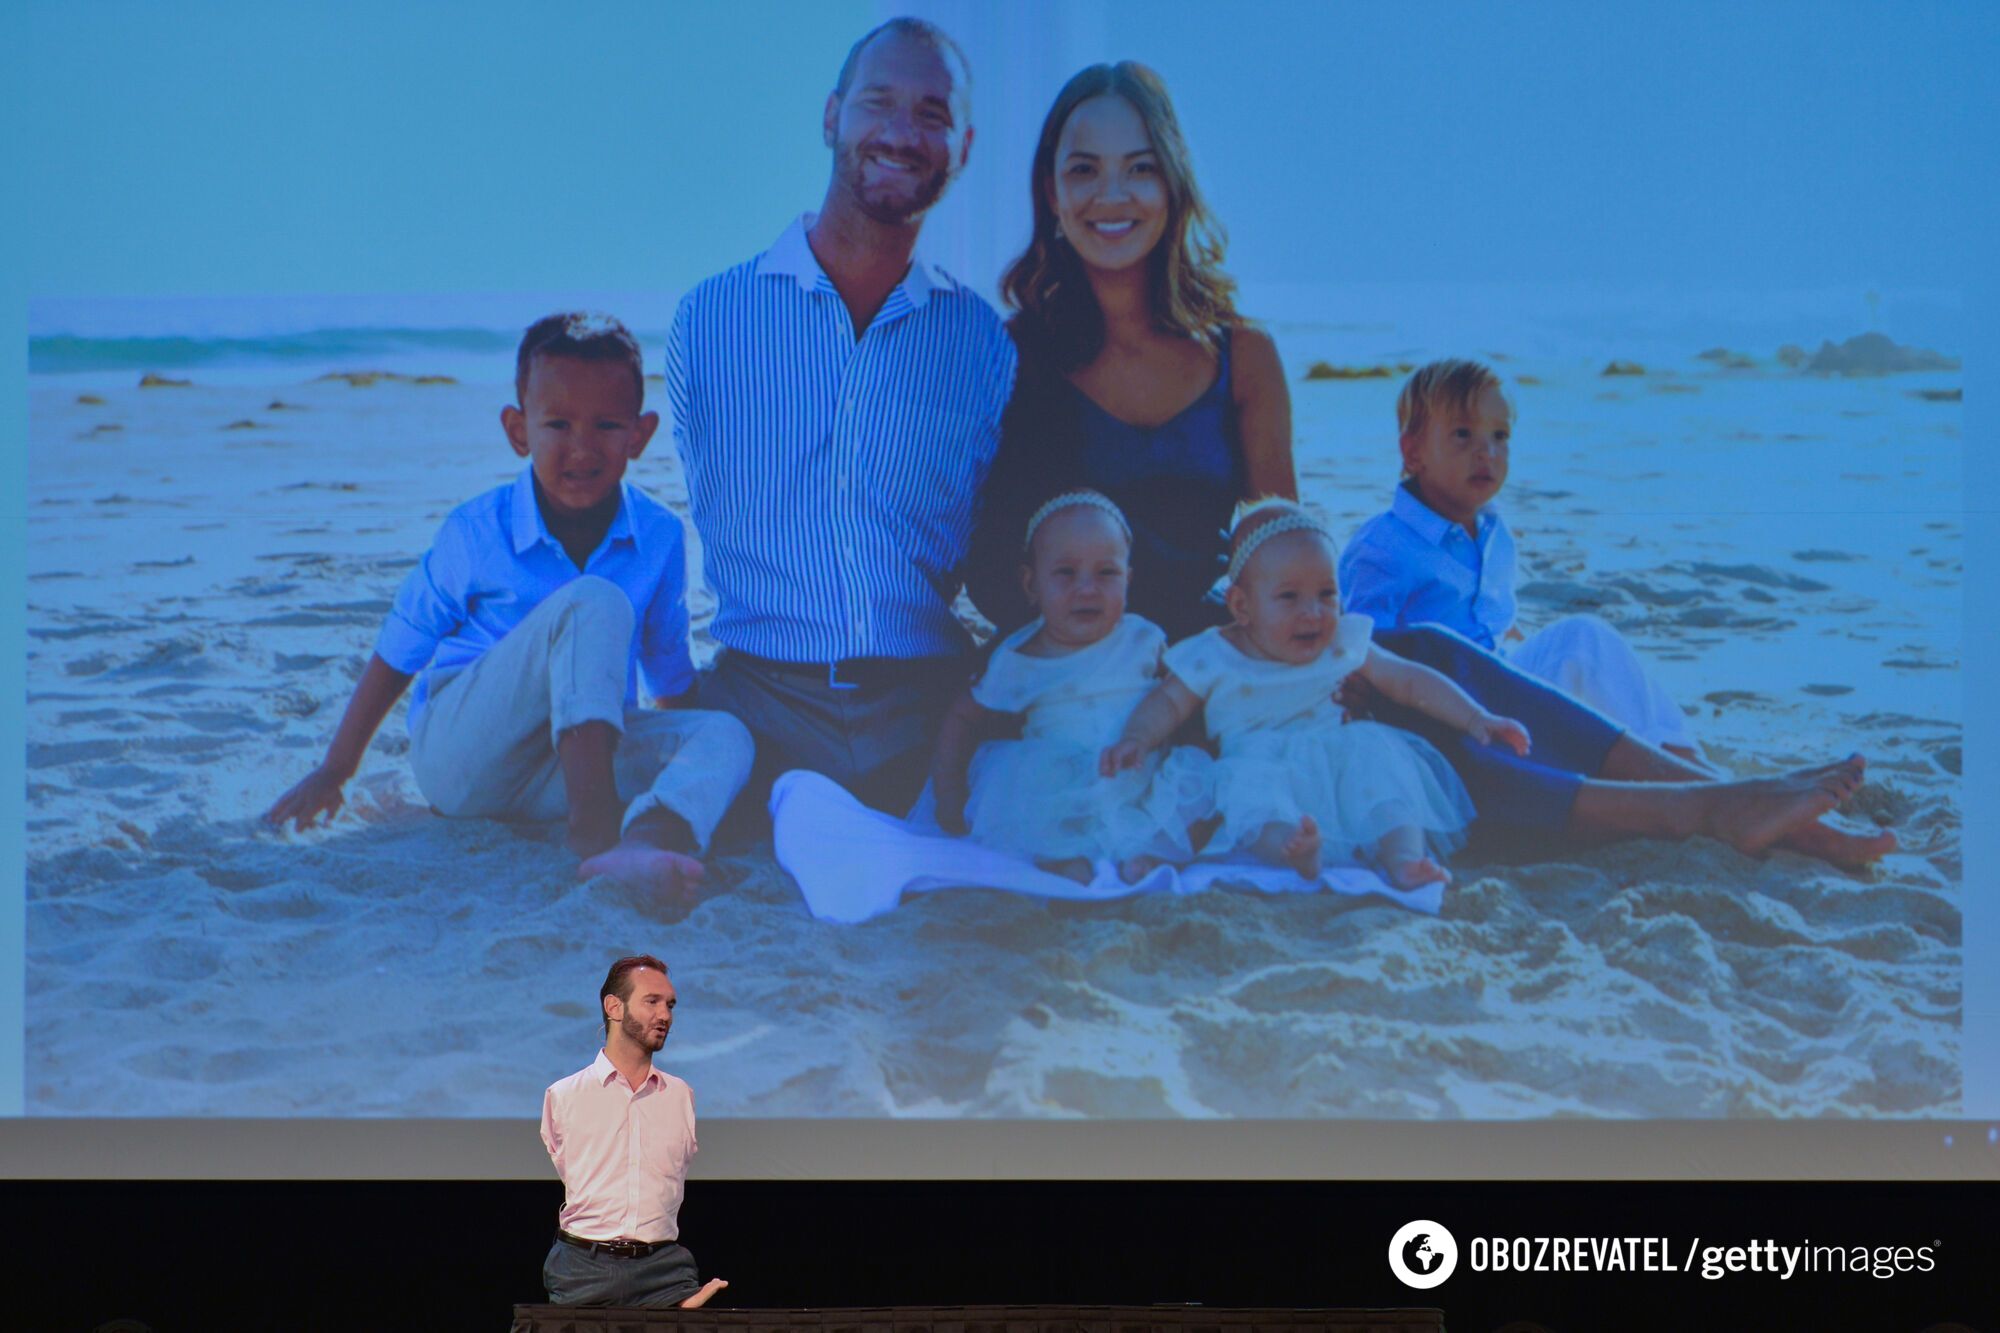 Where did the legendary man Nick Vujicic disappear to and why are there no recent photos of his family online?